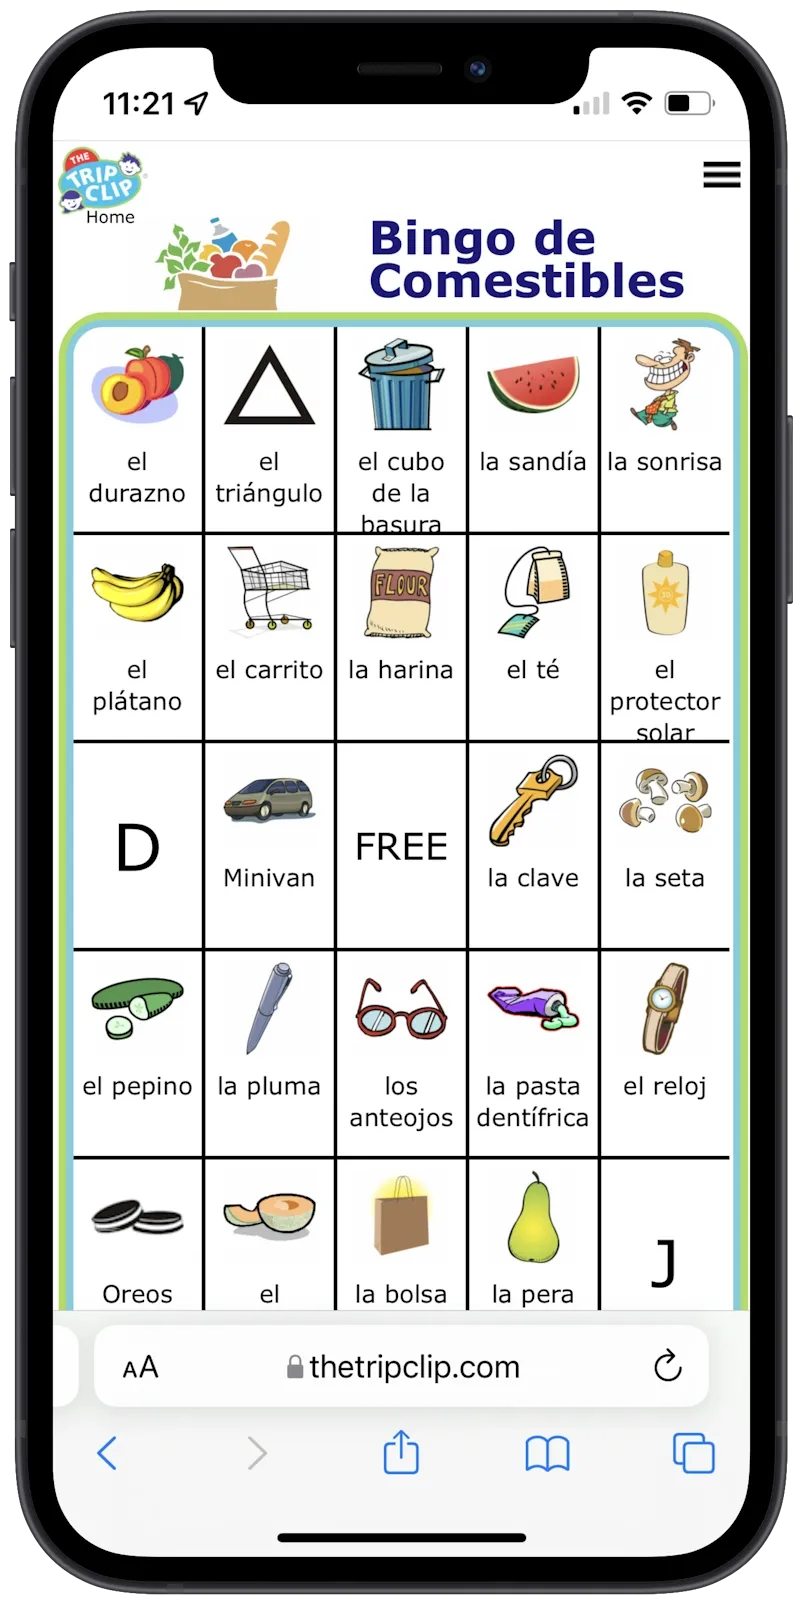 Bingo board with a grocery bag at the top